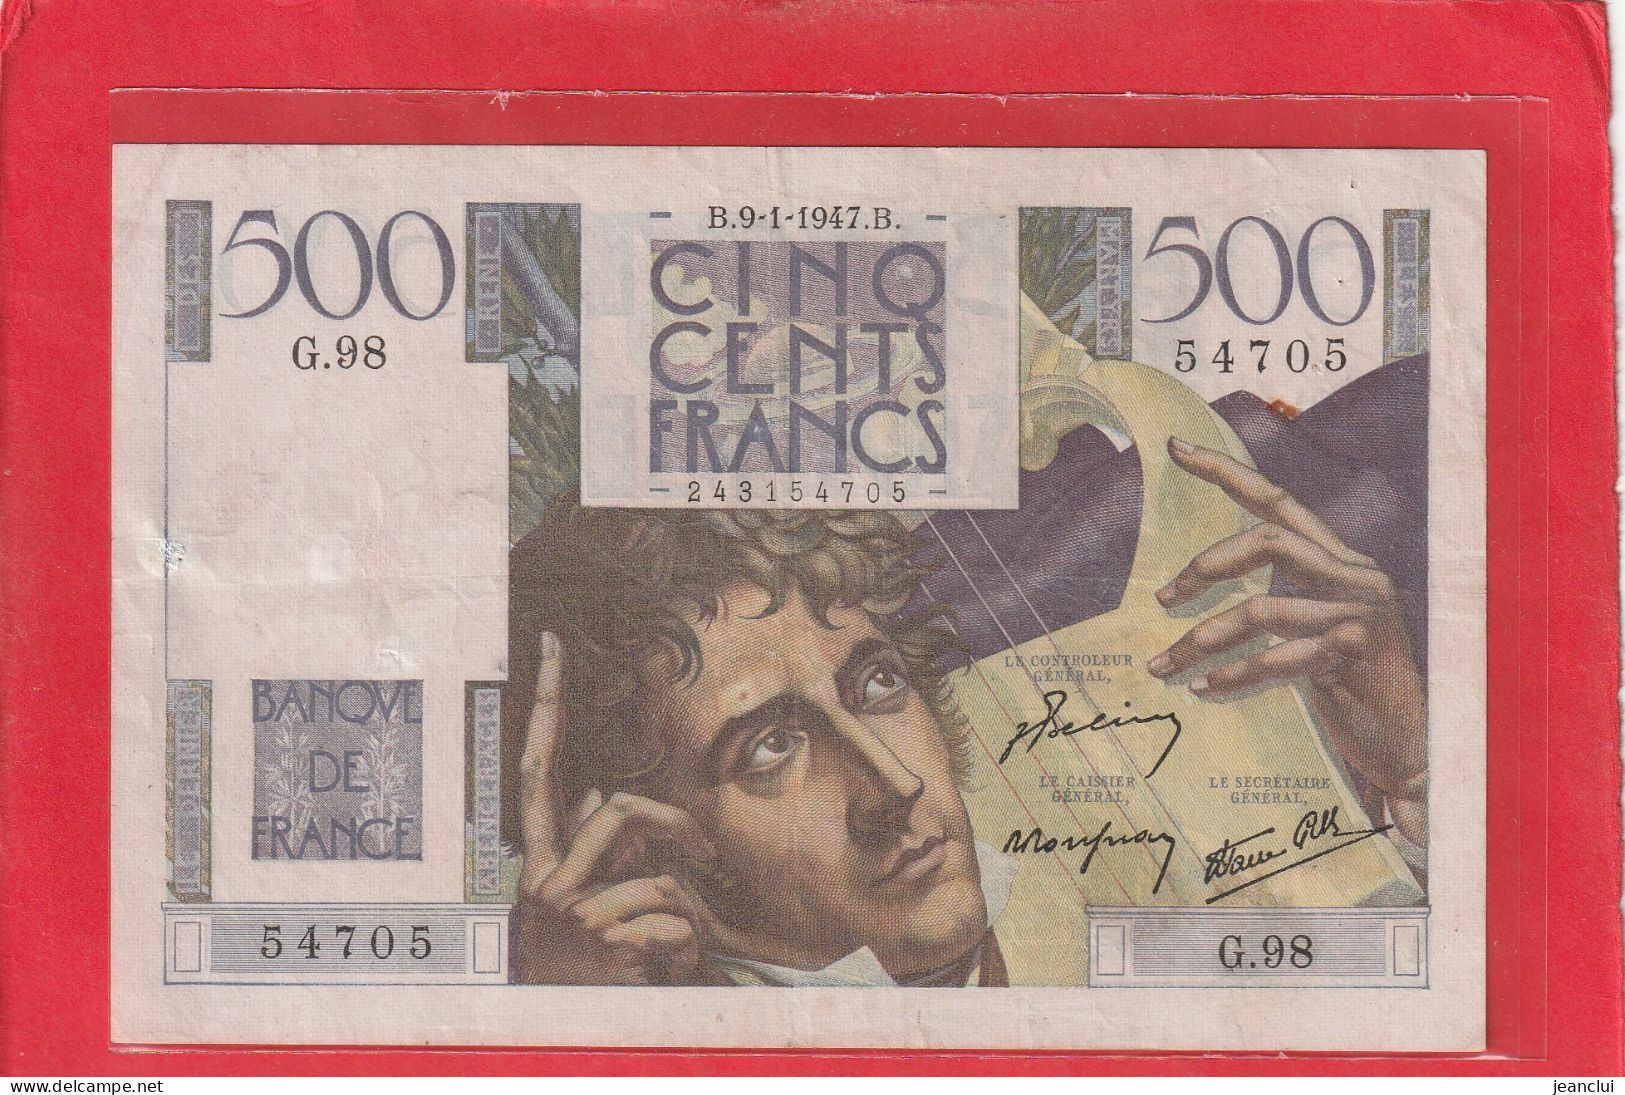 500 ANCIENS FRANCS "  CHATEAUBRIAND  "   .  9-1-1947    -  SERIE =  G.98  .  N°  54705   .  2 SCANNES - 500 F 1945-1953 ''Chateaubriand''